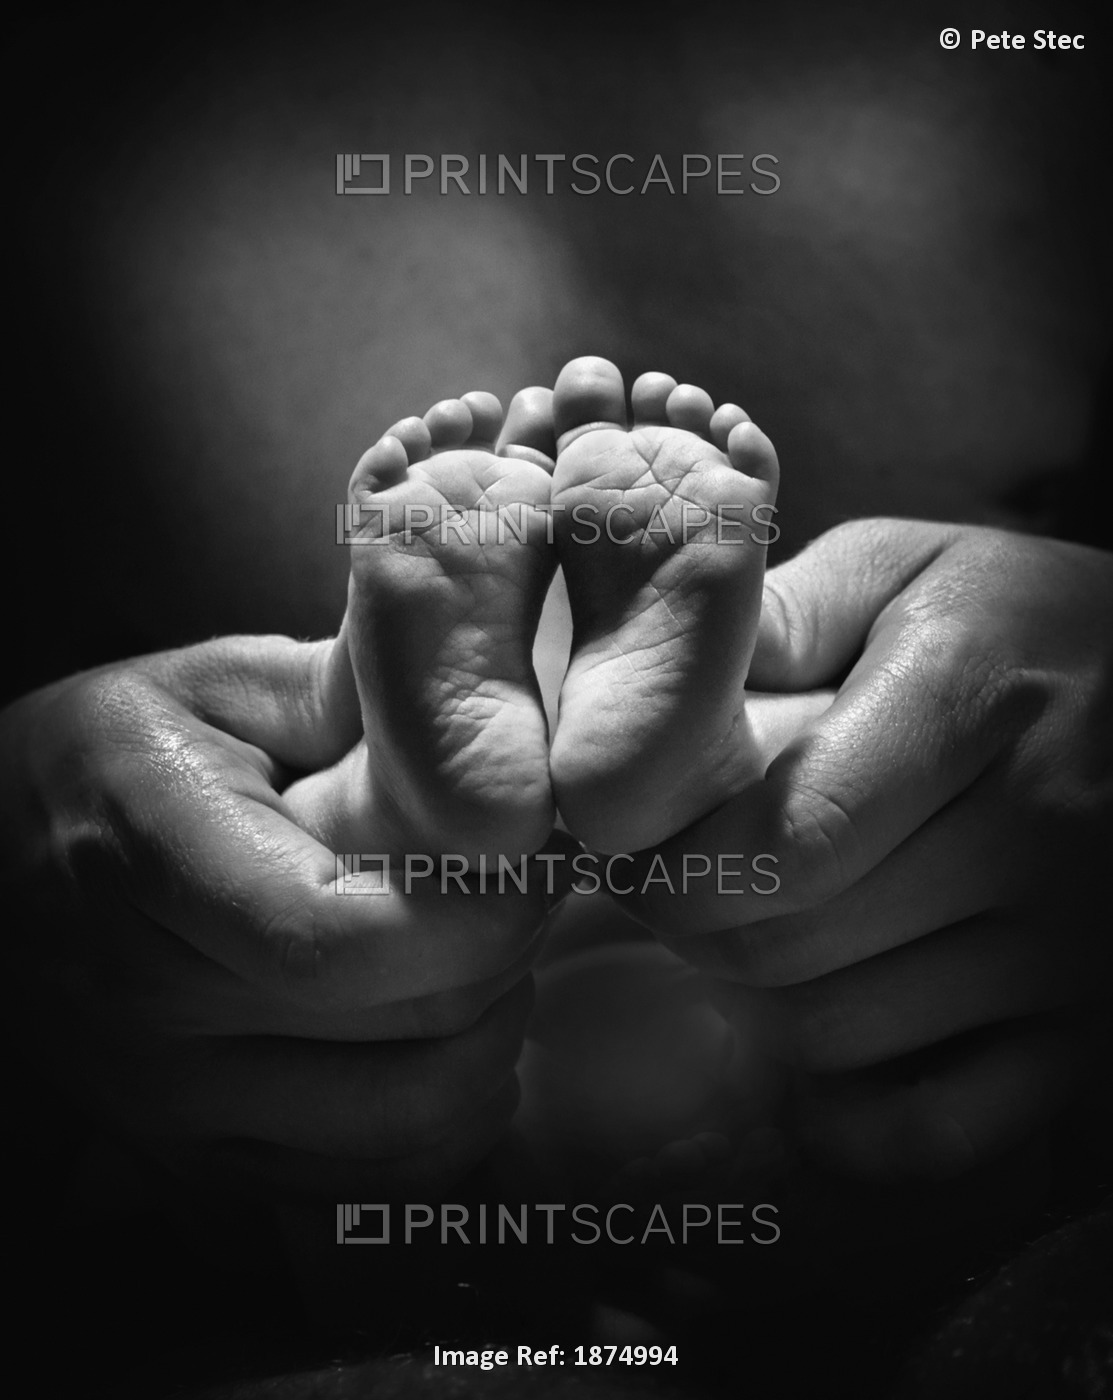 Adult Hands Holding Bare Baby Feet